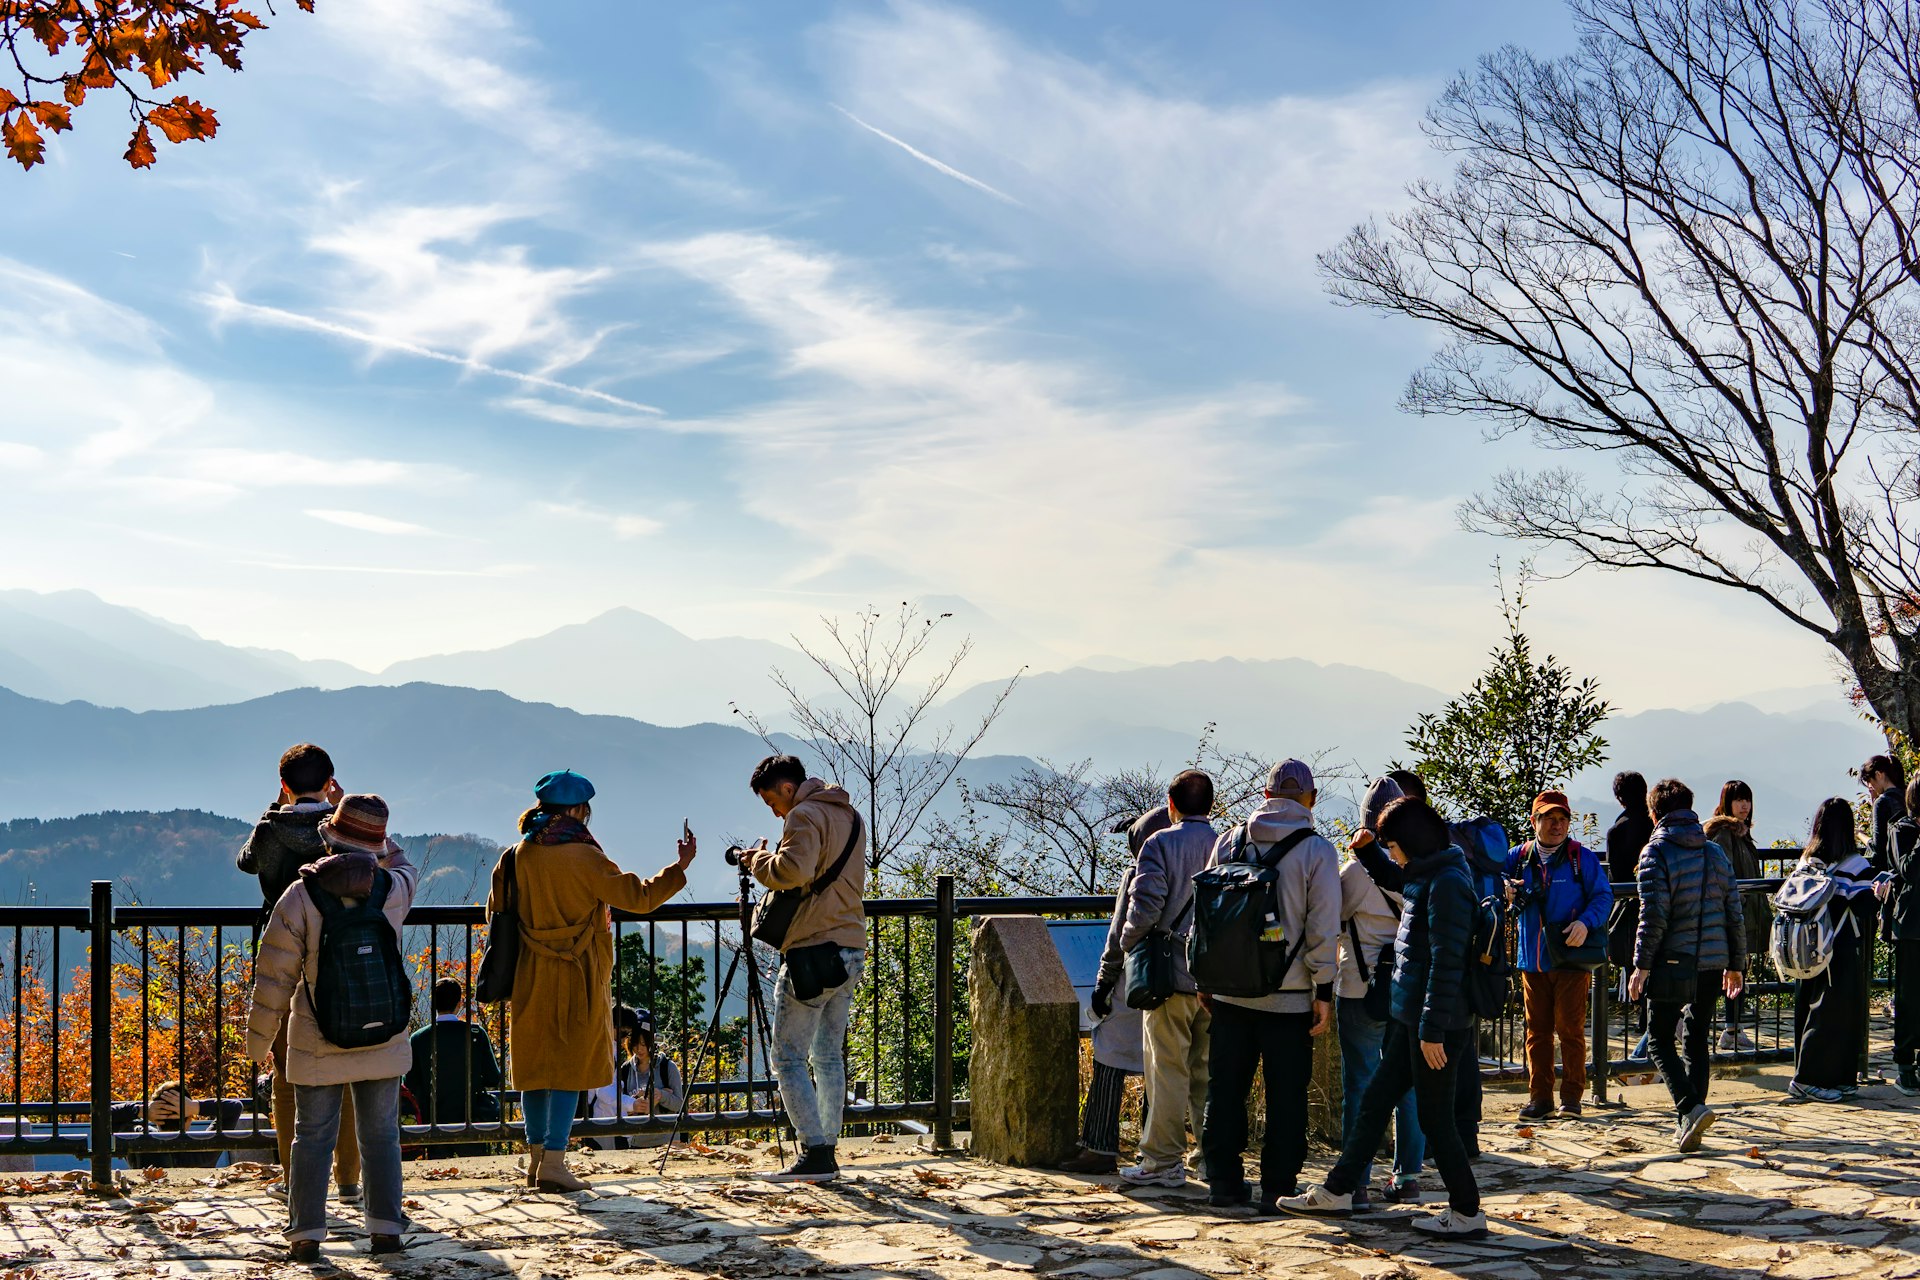  A crowd gathers at a Mount Fuji lookout point at the top of Mount Takao (Takao-San).